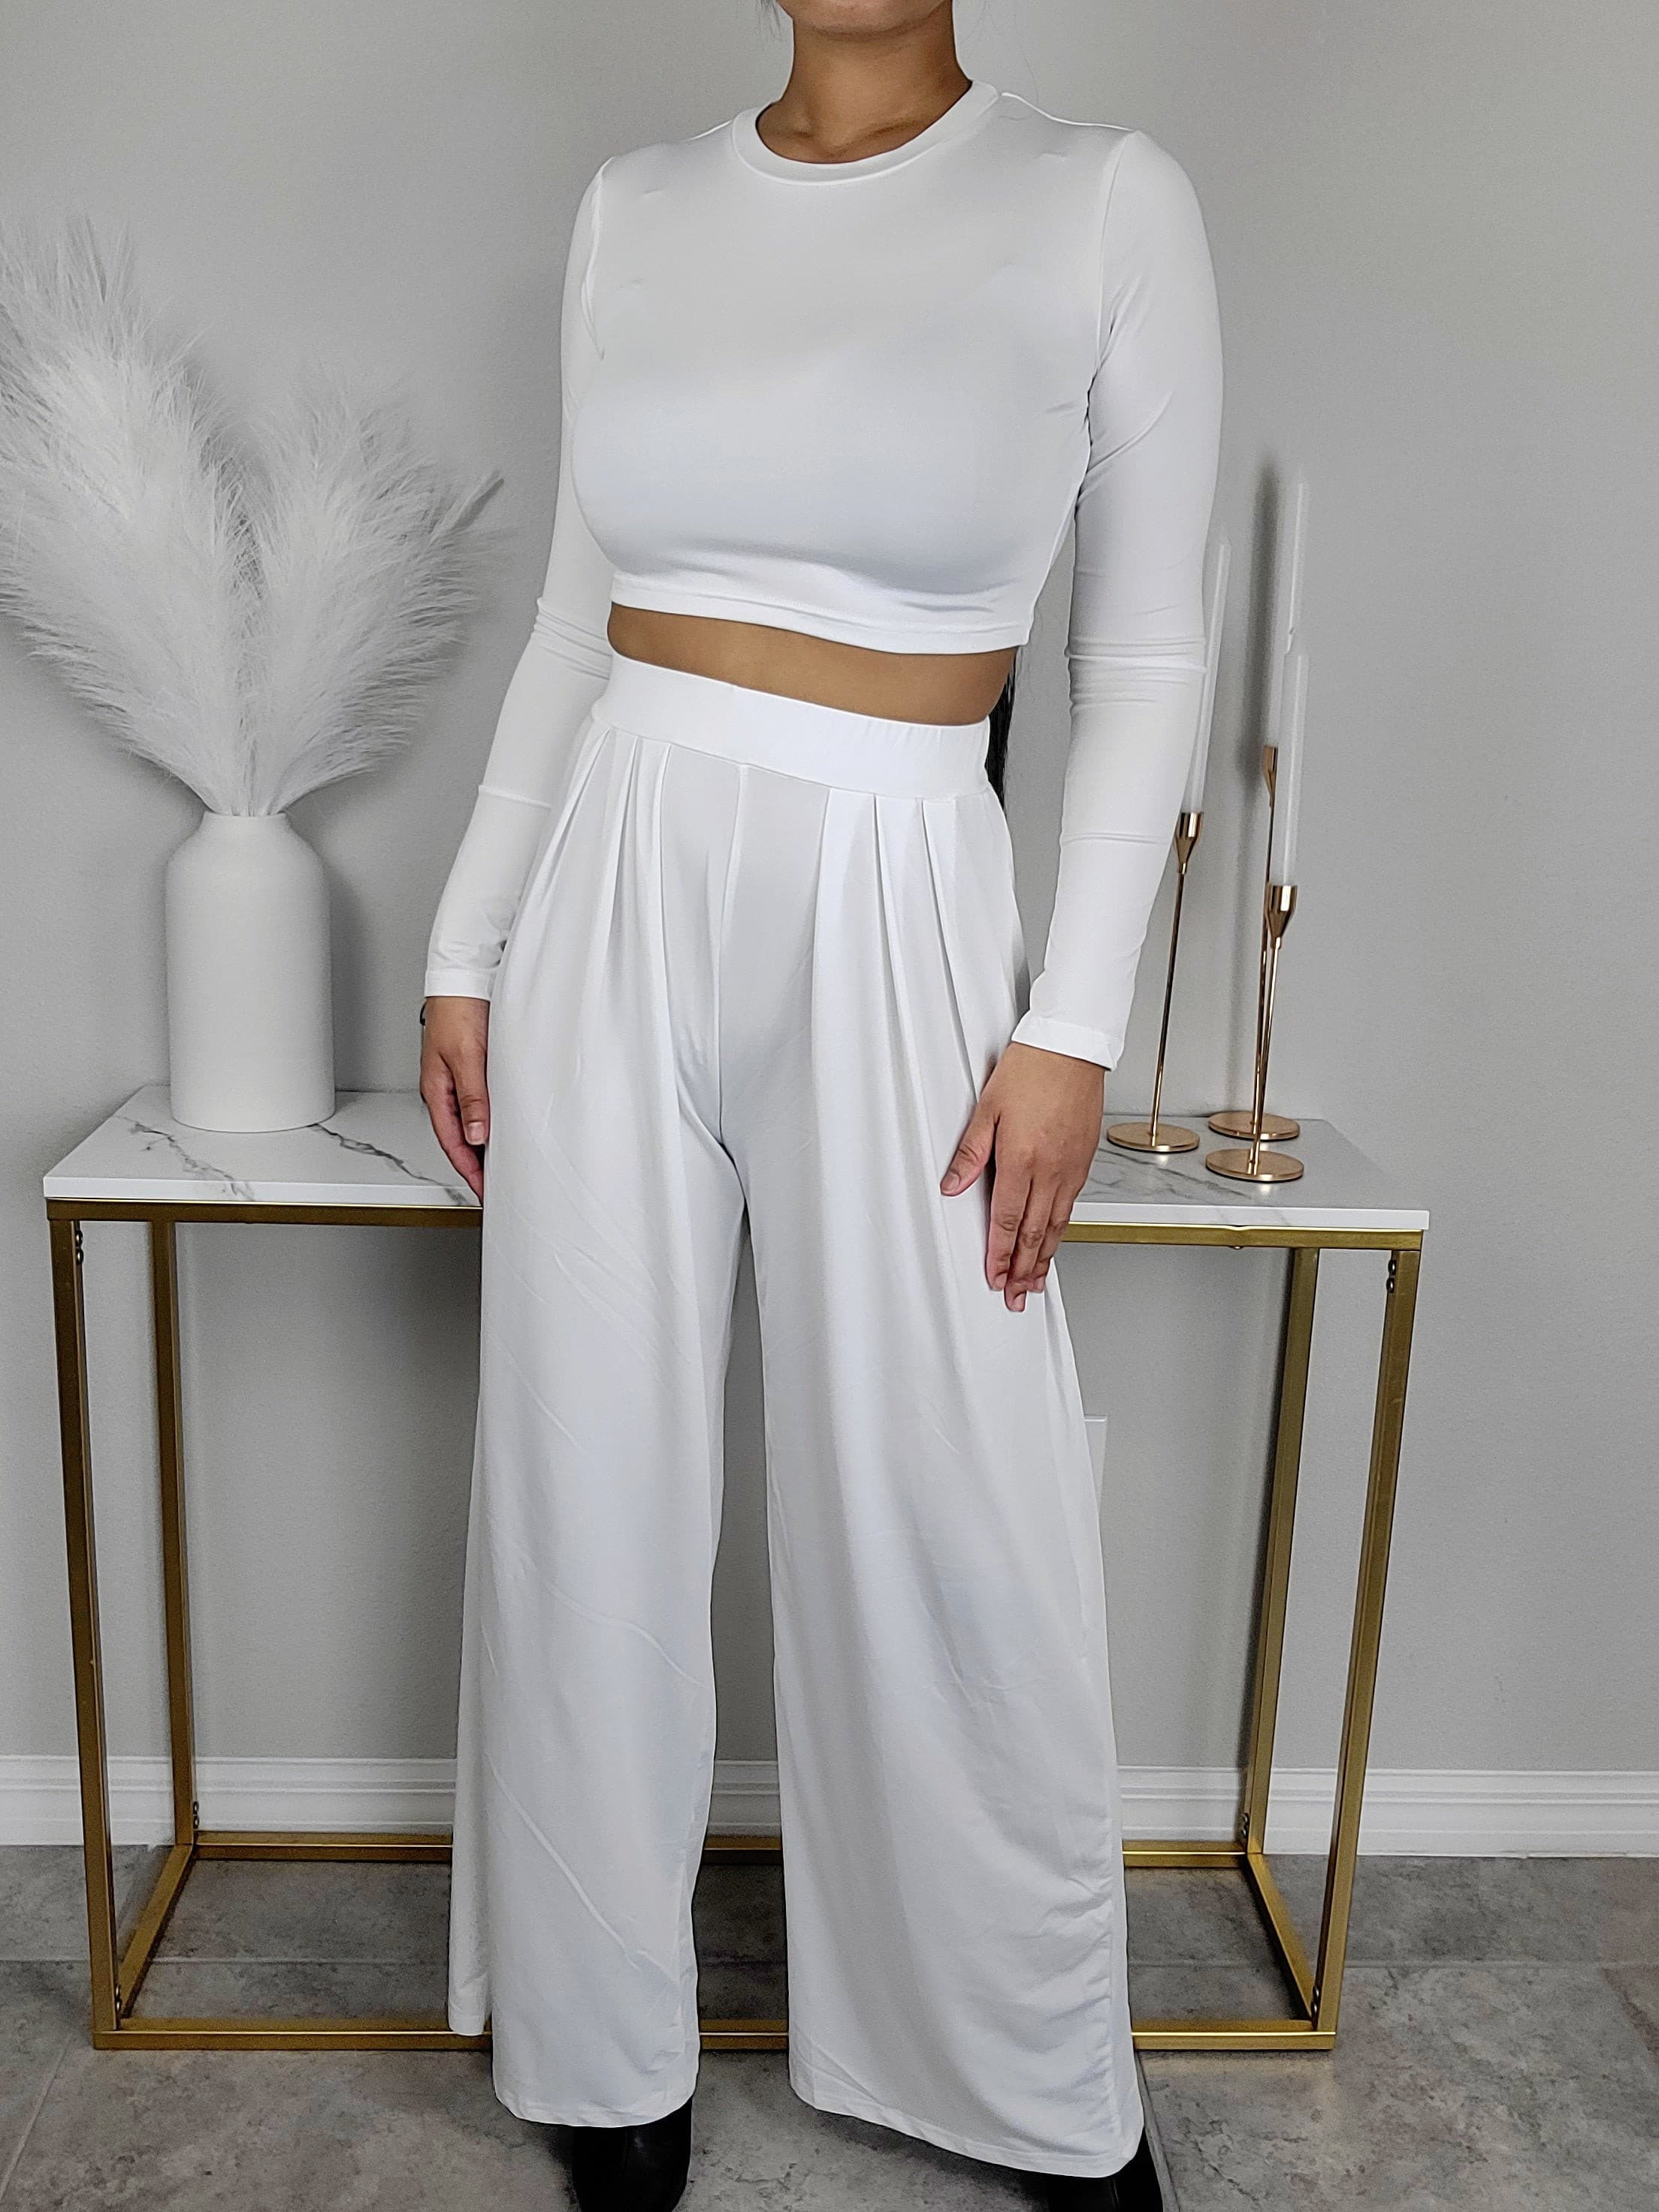 Comfy and Chic Pants Set - White